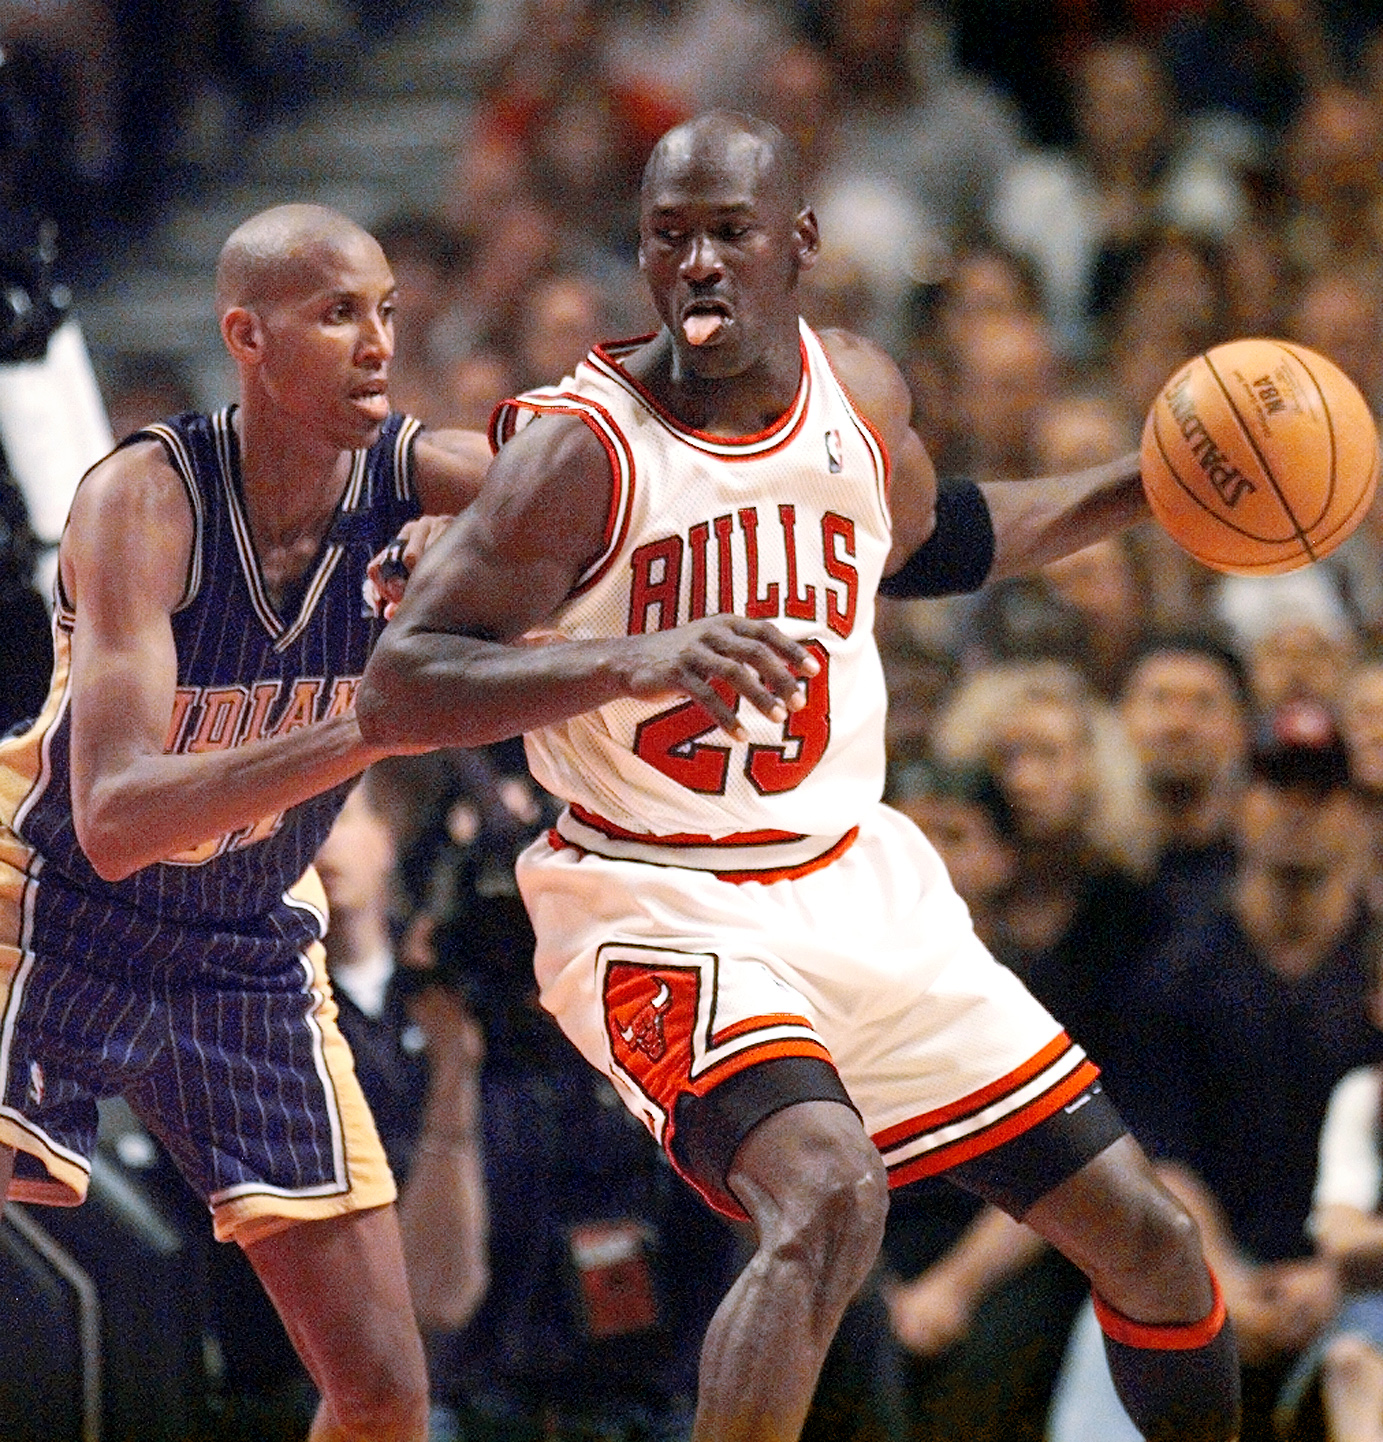 May 31, 1998; Chicago, IL, USA; Chicago Bulls guard Michael Jordan (23), right, is guarded by Indiana Pacers player Reggie Miller (31) in the second half at the United Center. Mandatory Credit: Anne Ryan-USA TODAY (NBA News)